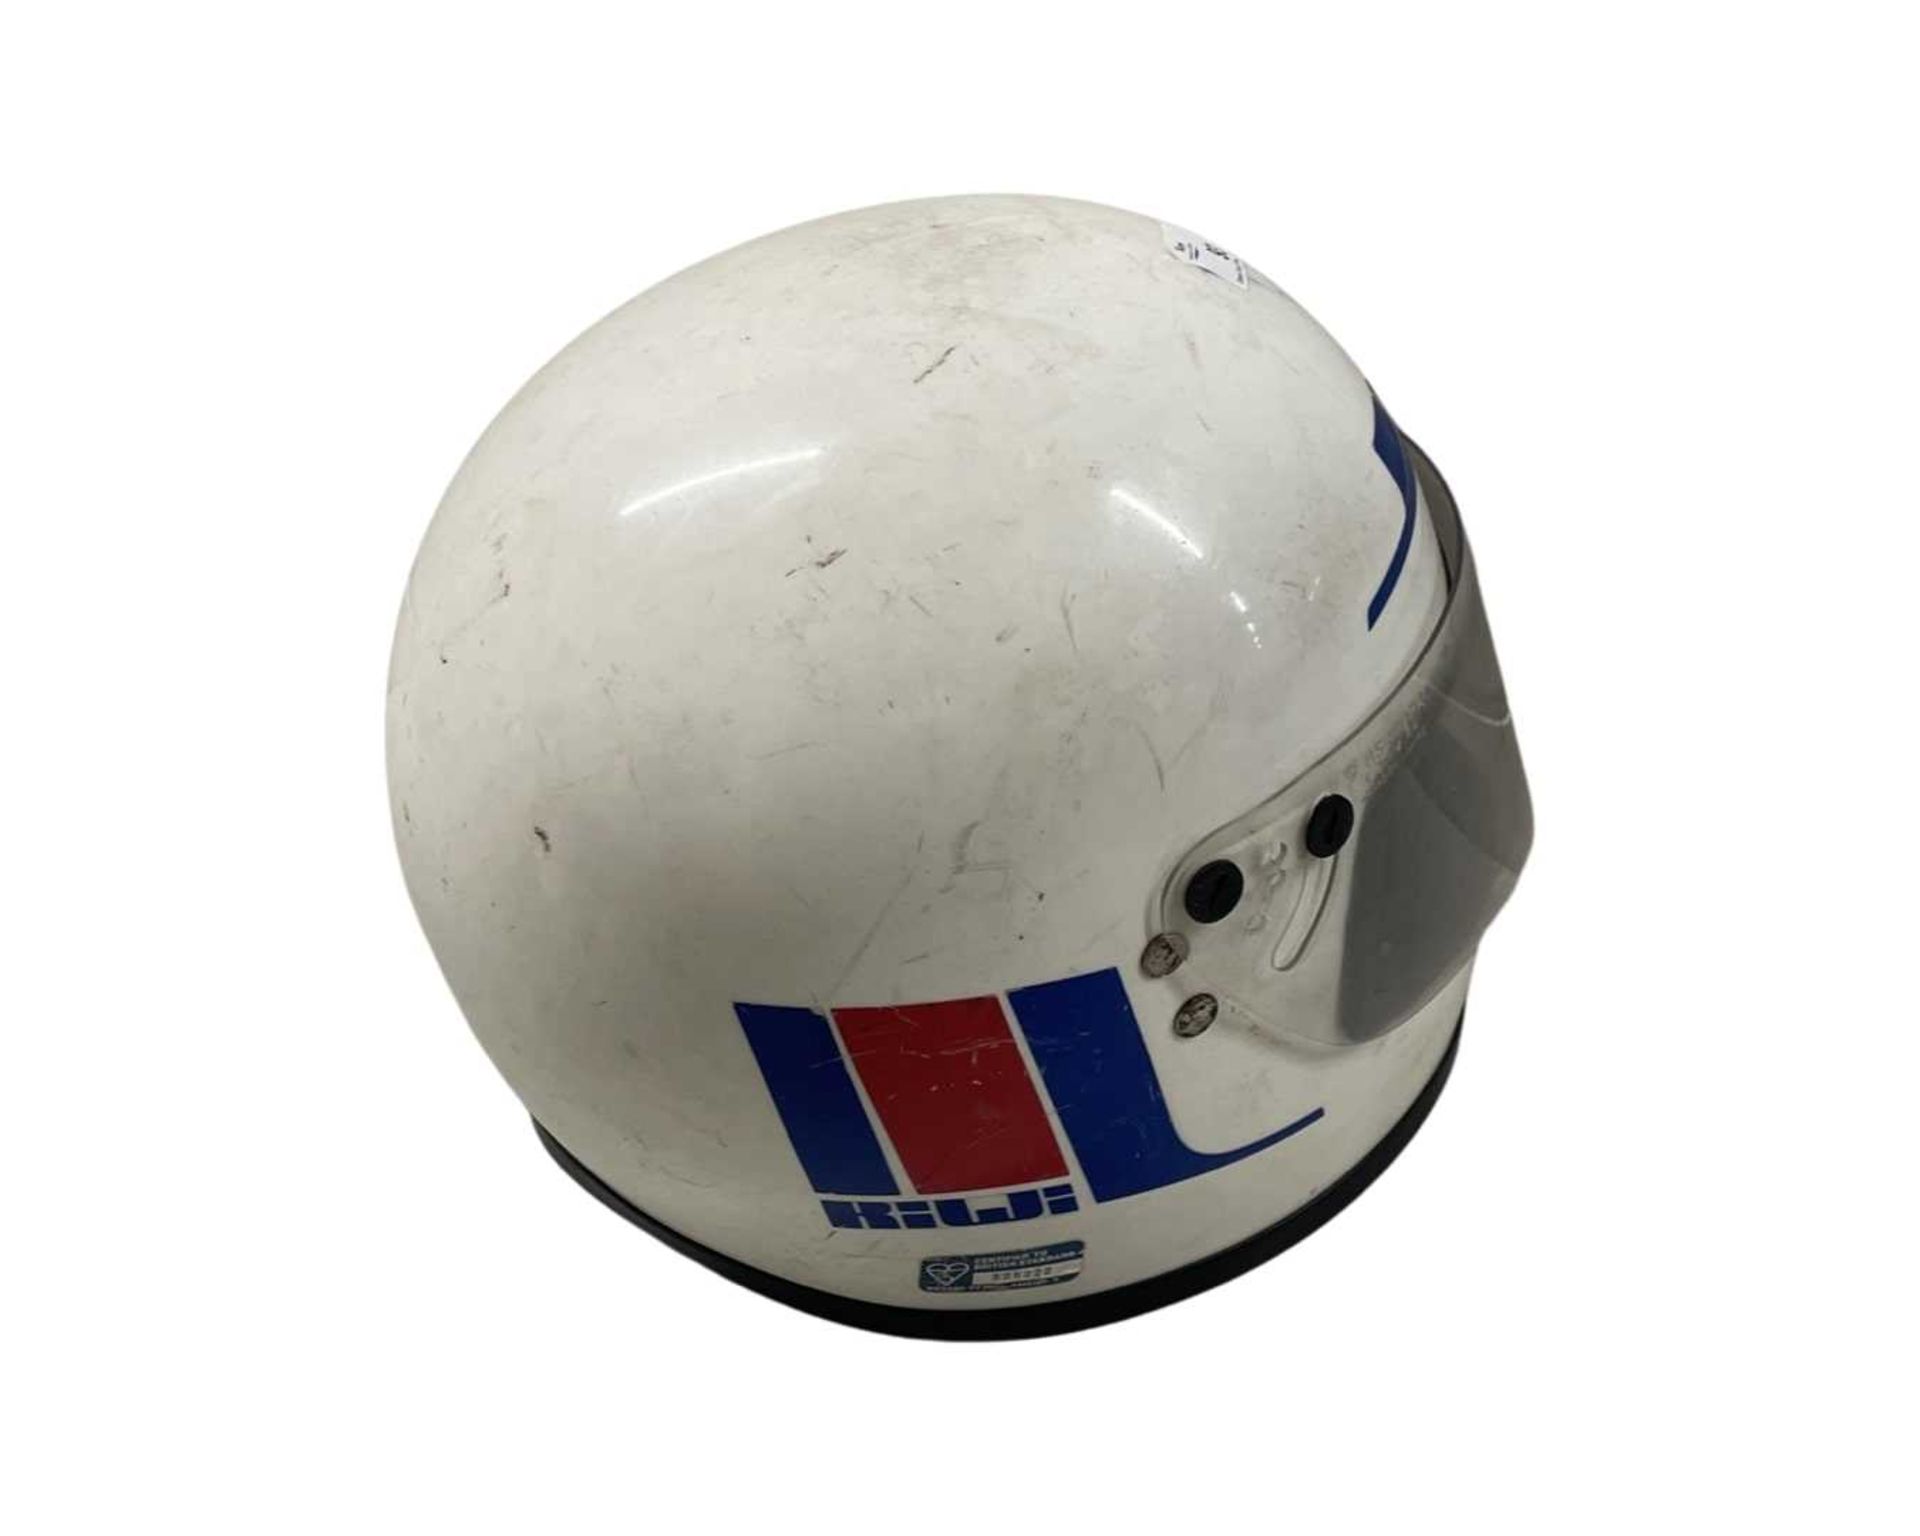 1970's crash helmet (for display purposes/collecting only) - Image 3 of 3